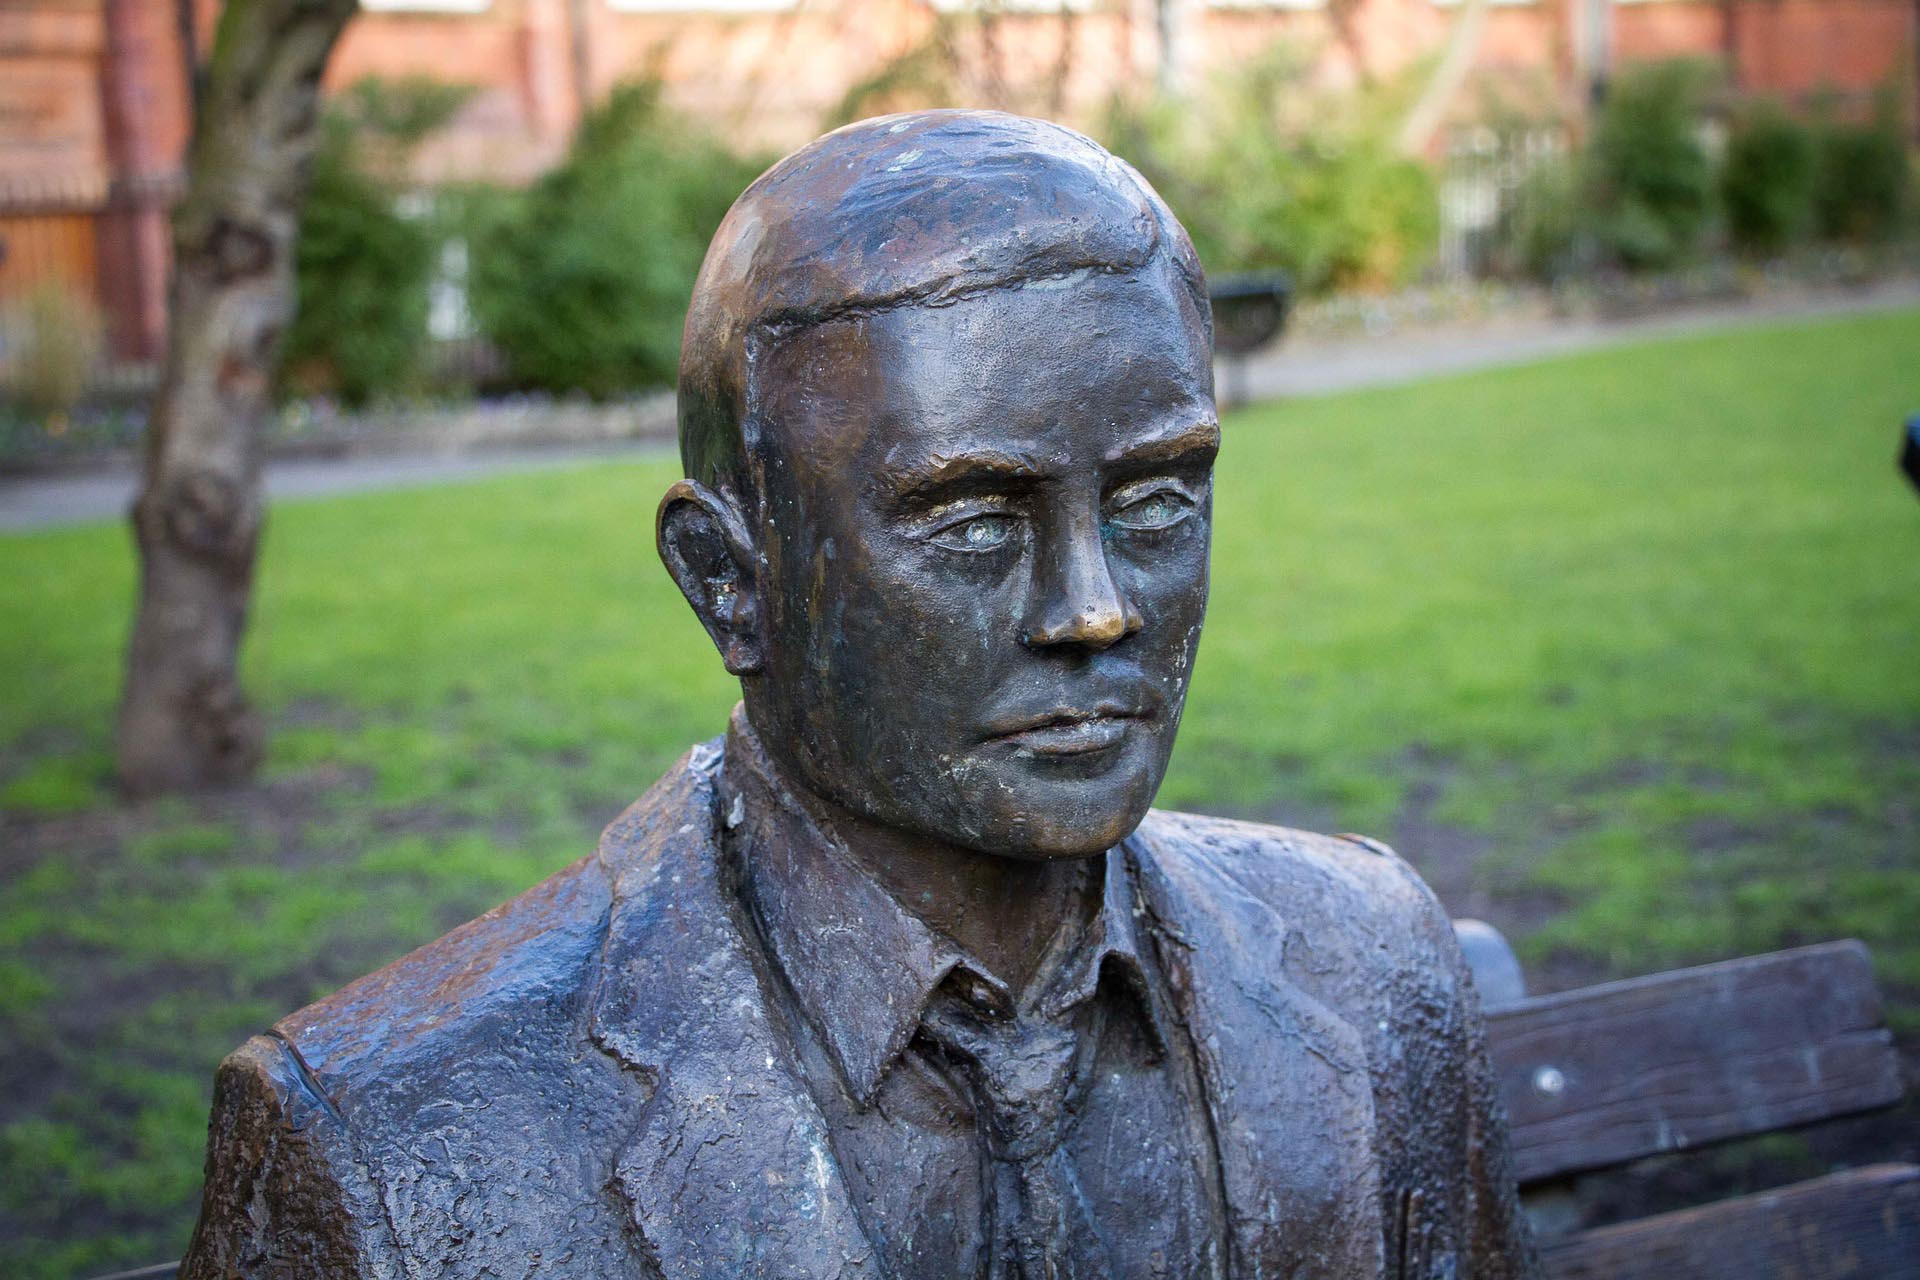 Alan Turing statue in Manchester. Image by philcurtis from Pixabay 